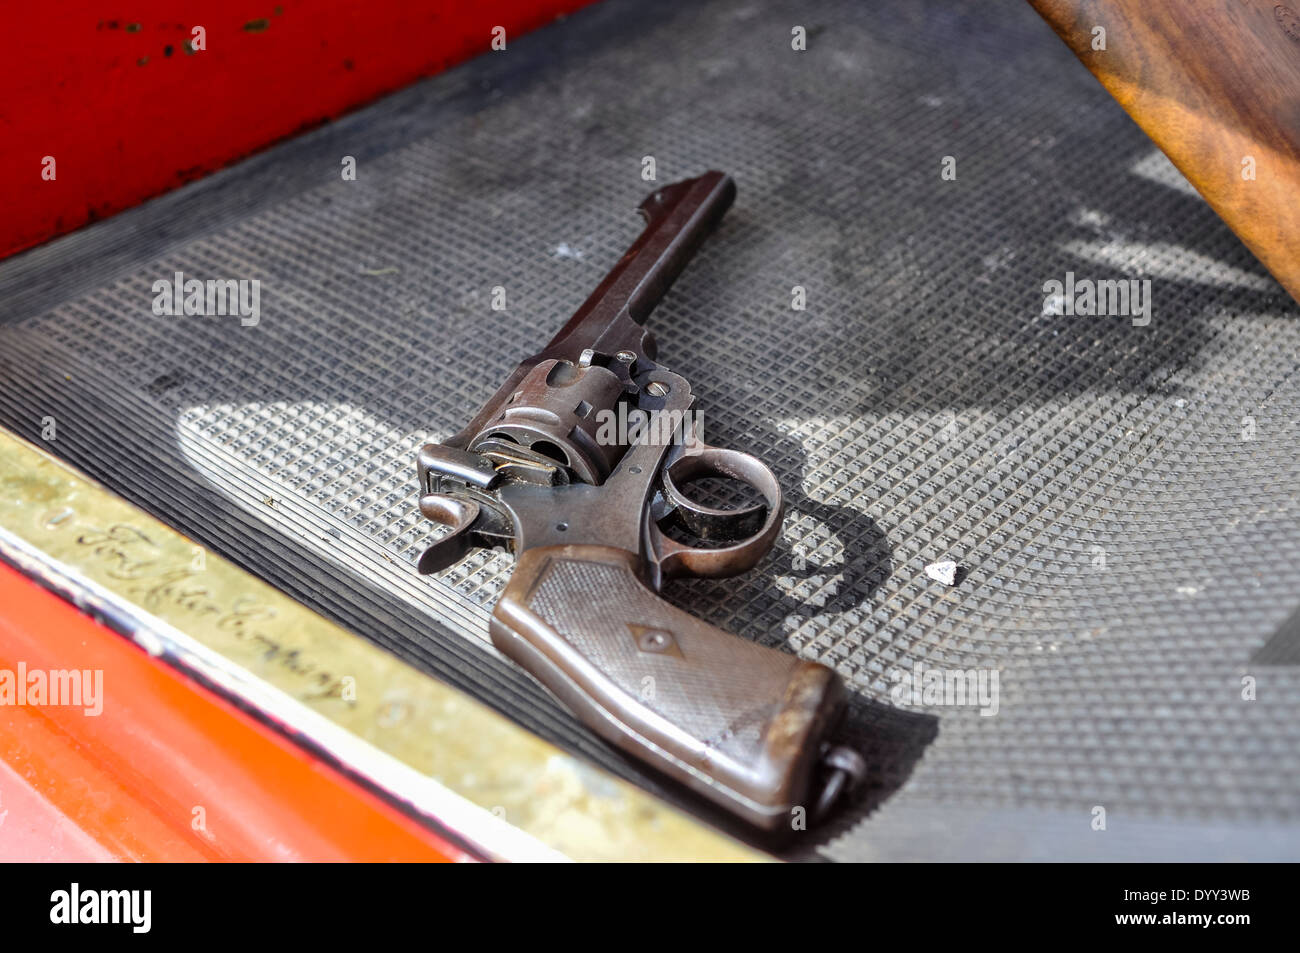 A WW1 era revolver lying on the footwell of an old Ford car Stock Photo